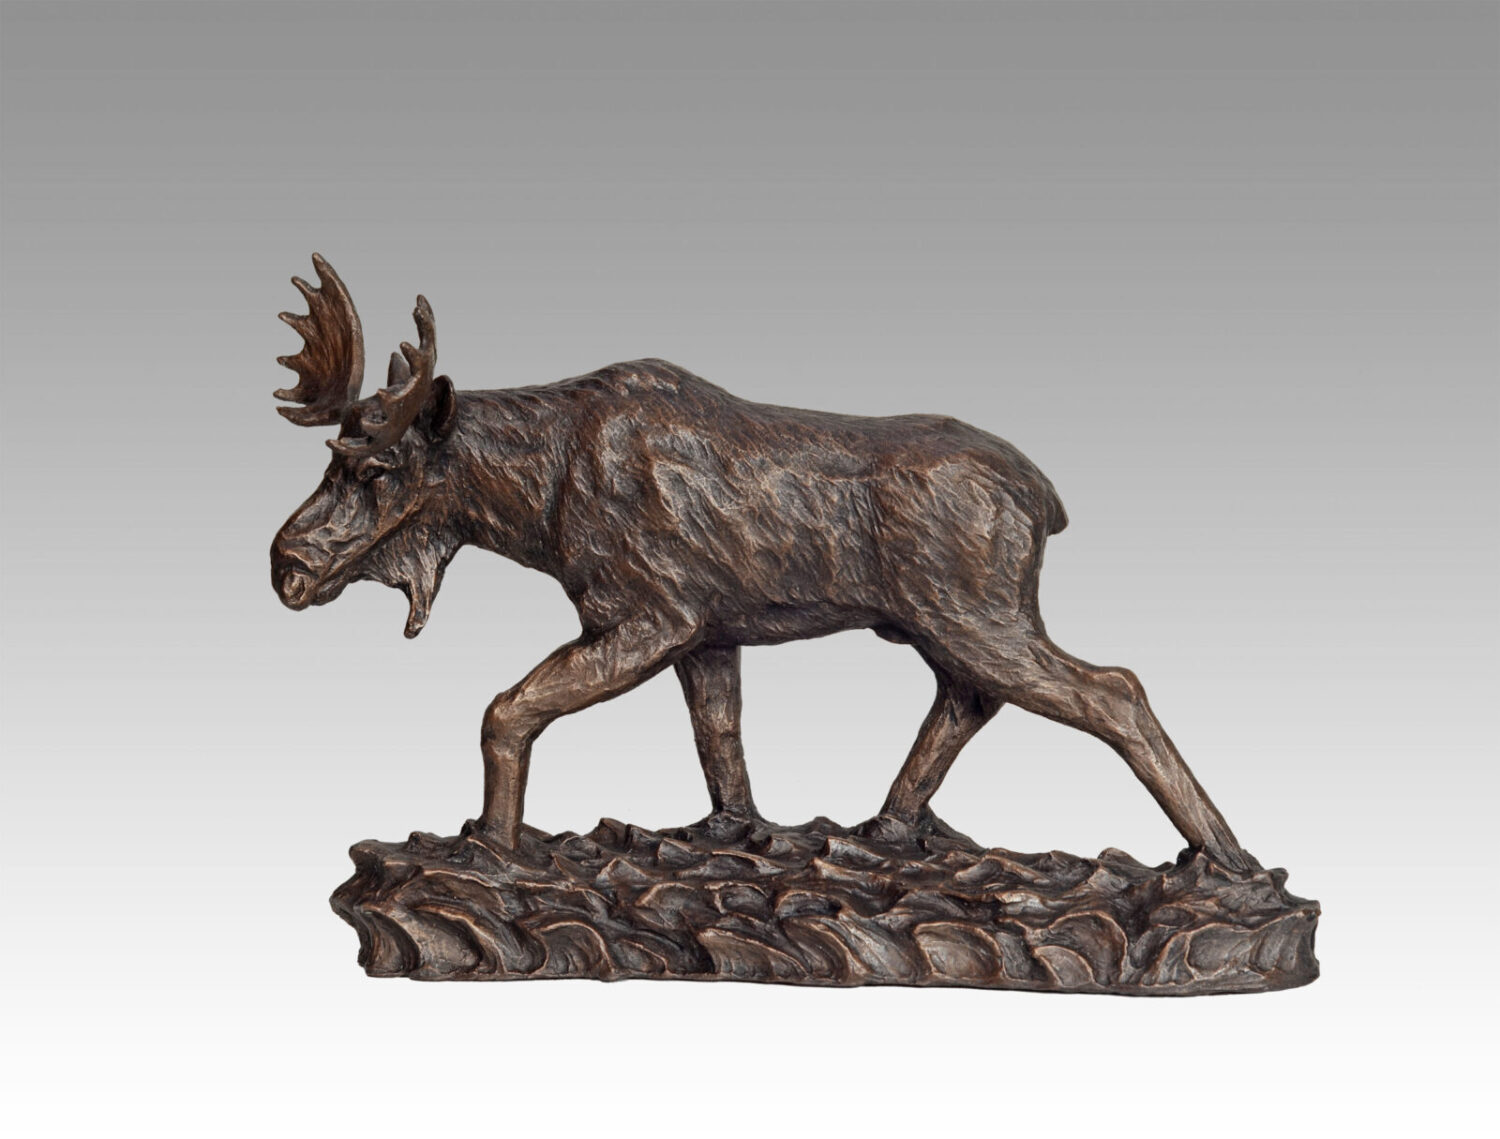 Gallery, River's Wild, $375 CAD, Metal Infused, 17 ¼" L x 11" H, Edition 60, Wildlife Sculpture of a moose, Sculptor Tyler Fauvelle